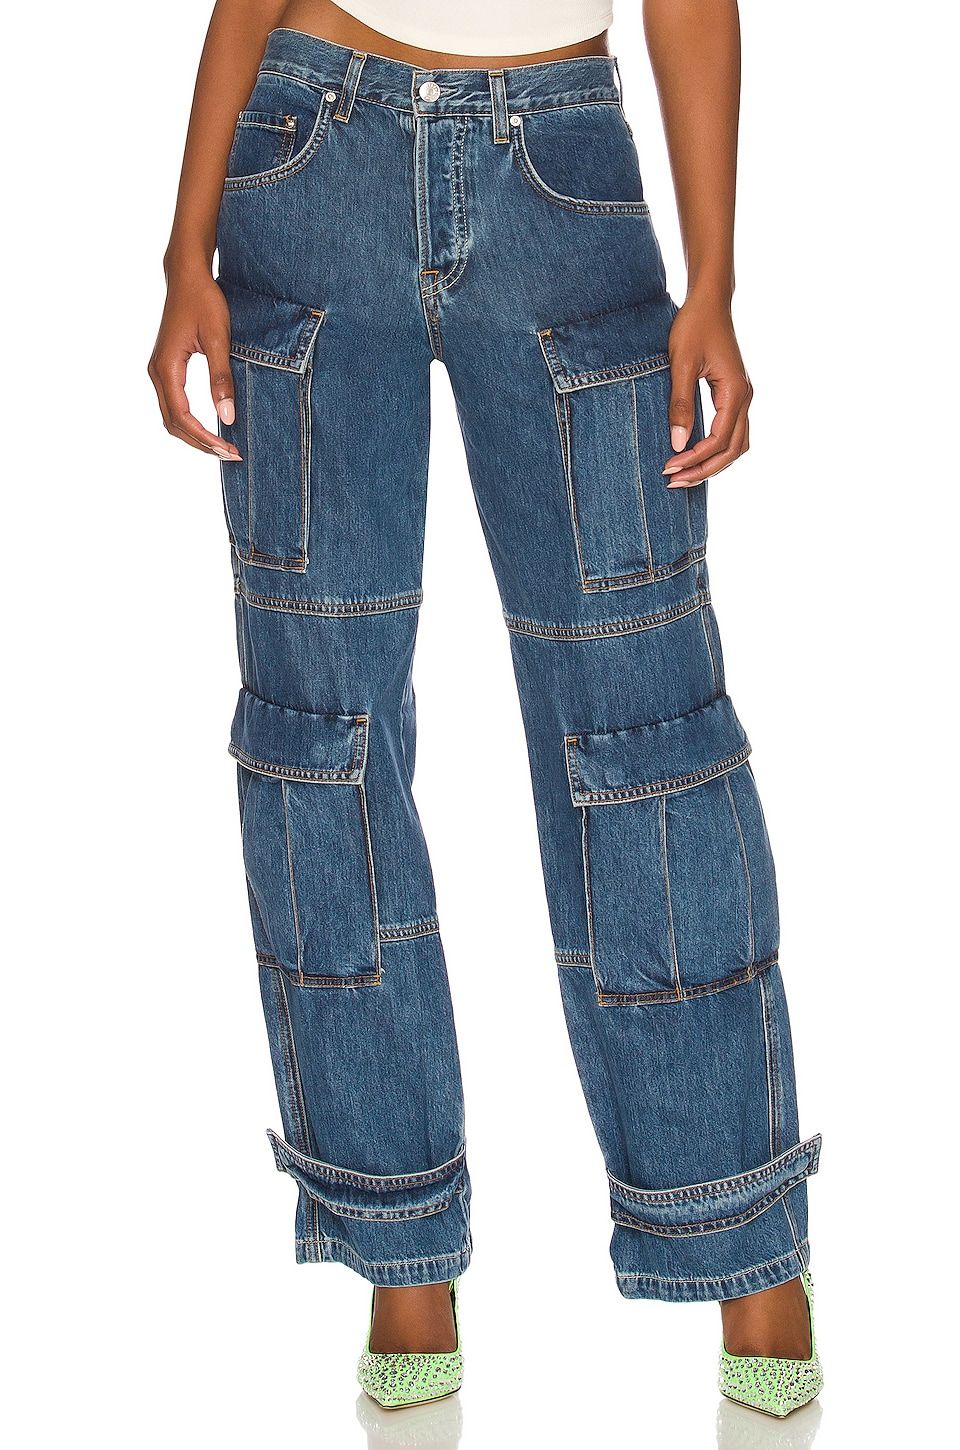 Aggregate 82+ jeans and trousers for ladies latest - in.duhocakina